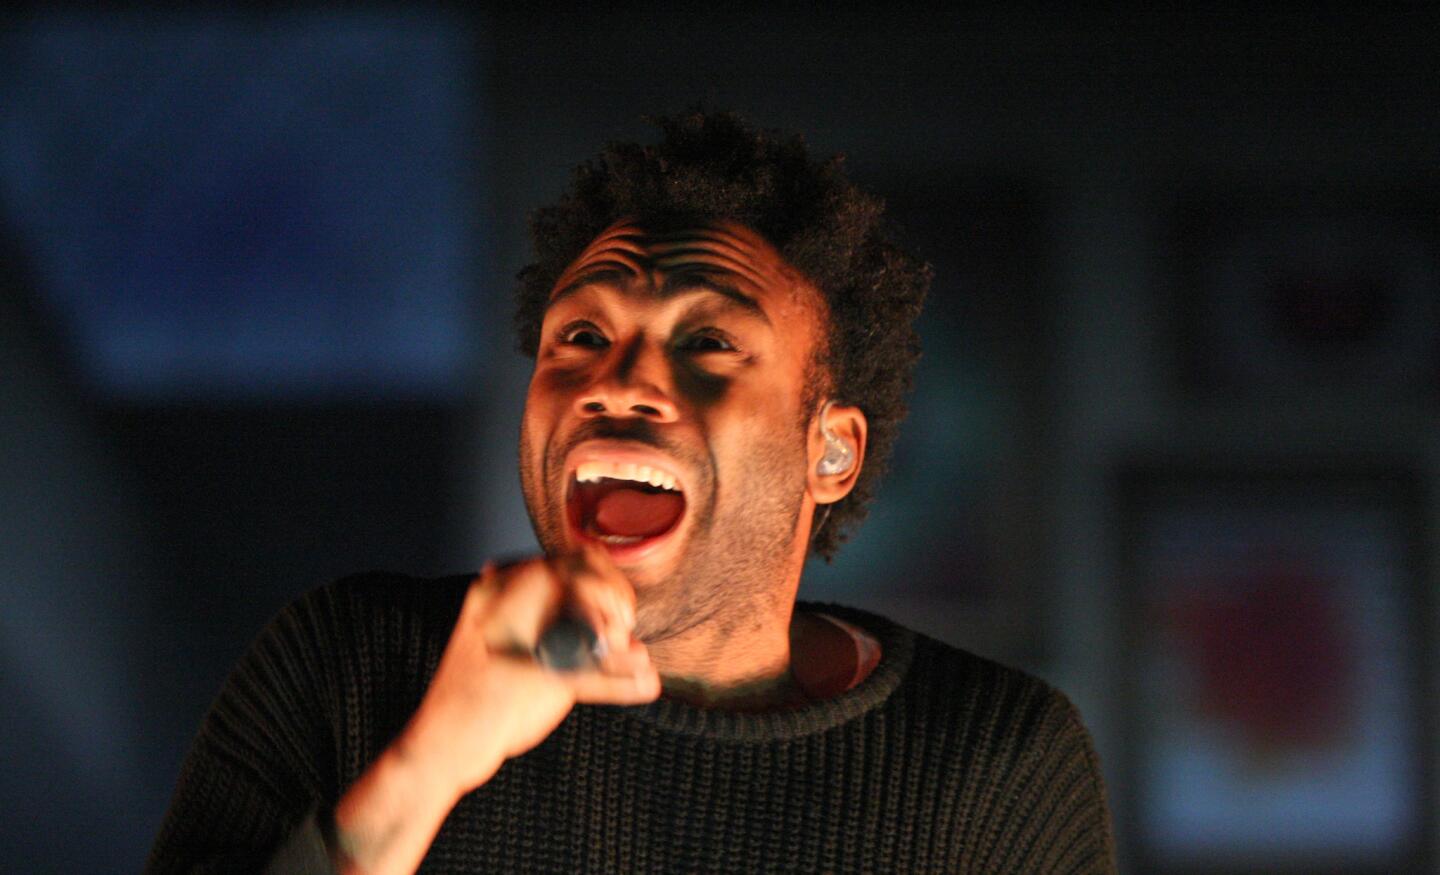 Rapper/actor Donald Glover performs at the Shrine Auditorium.